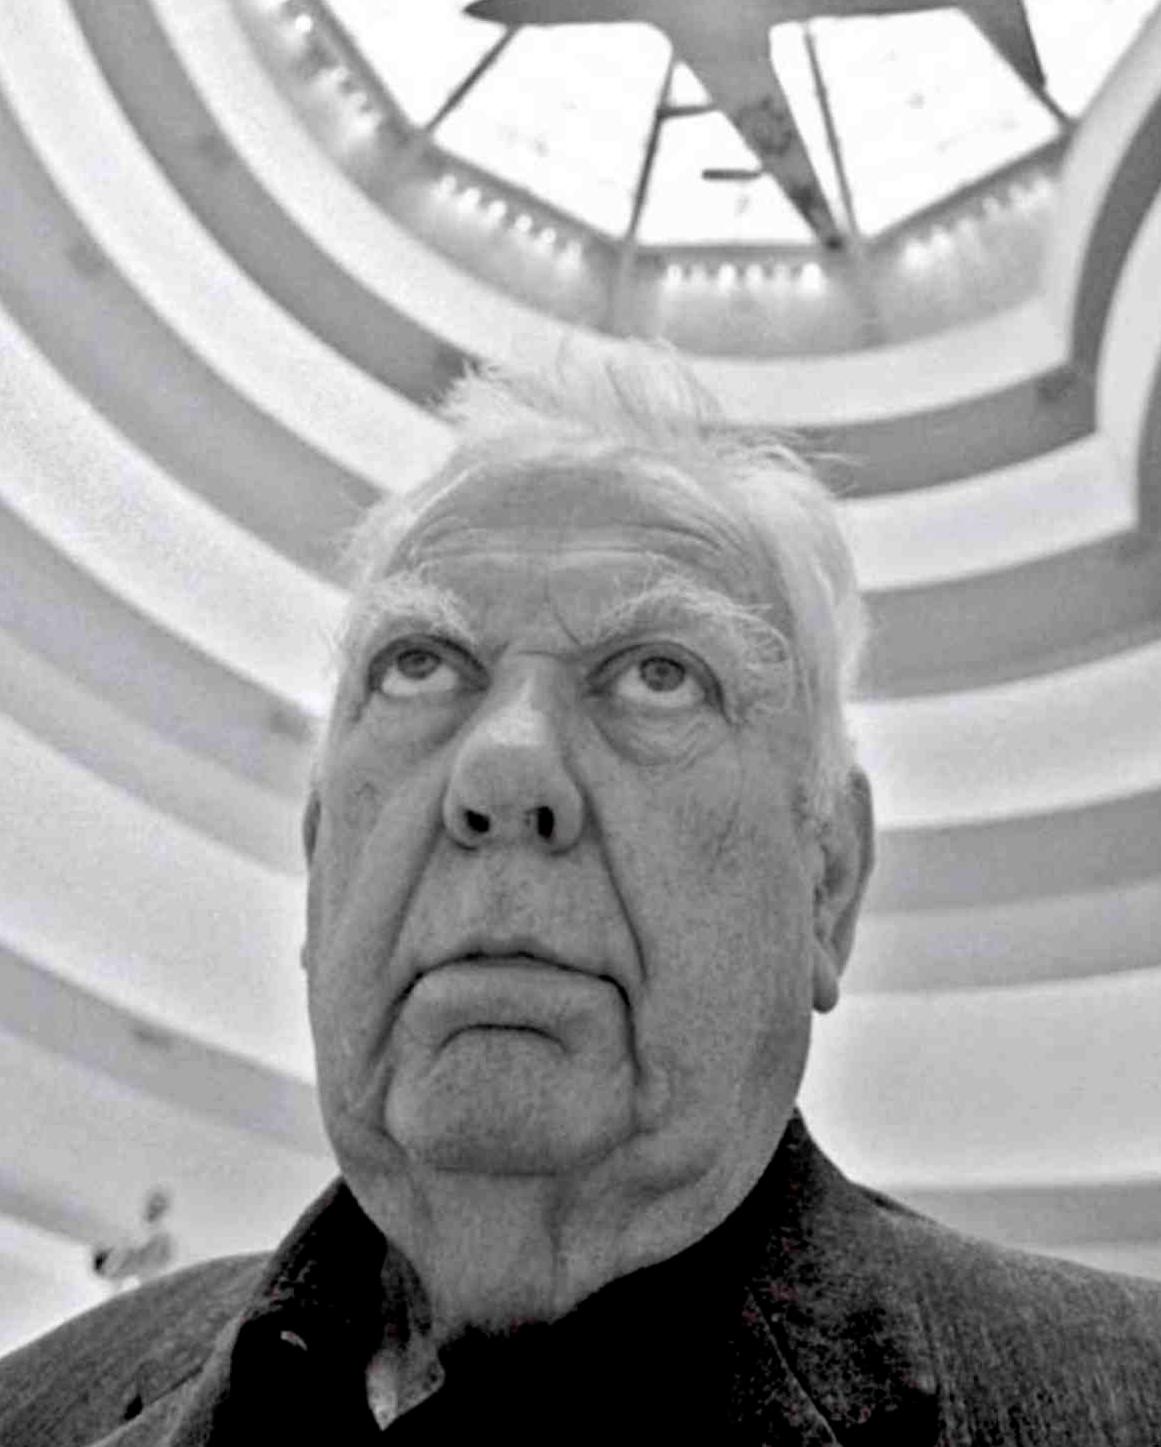 Artist Alexander Calder in the Guggenheim gazing up at his painted jet aircraft  - Photograph by Jack Mitchell